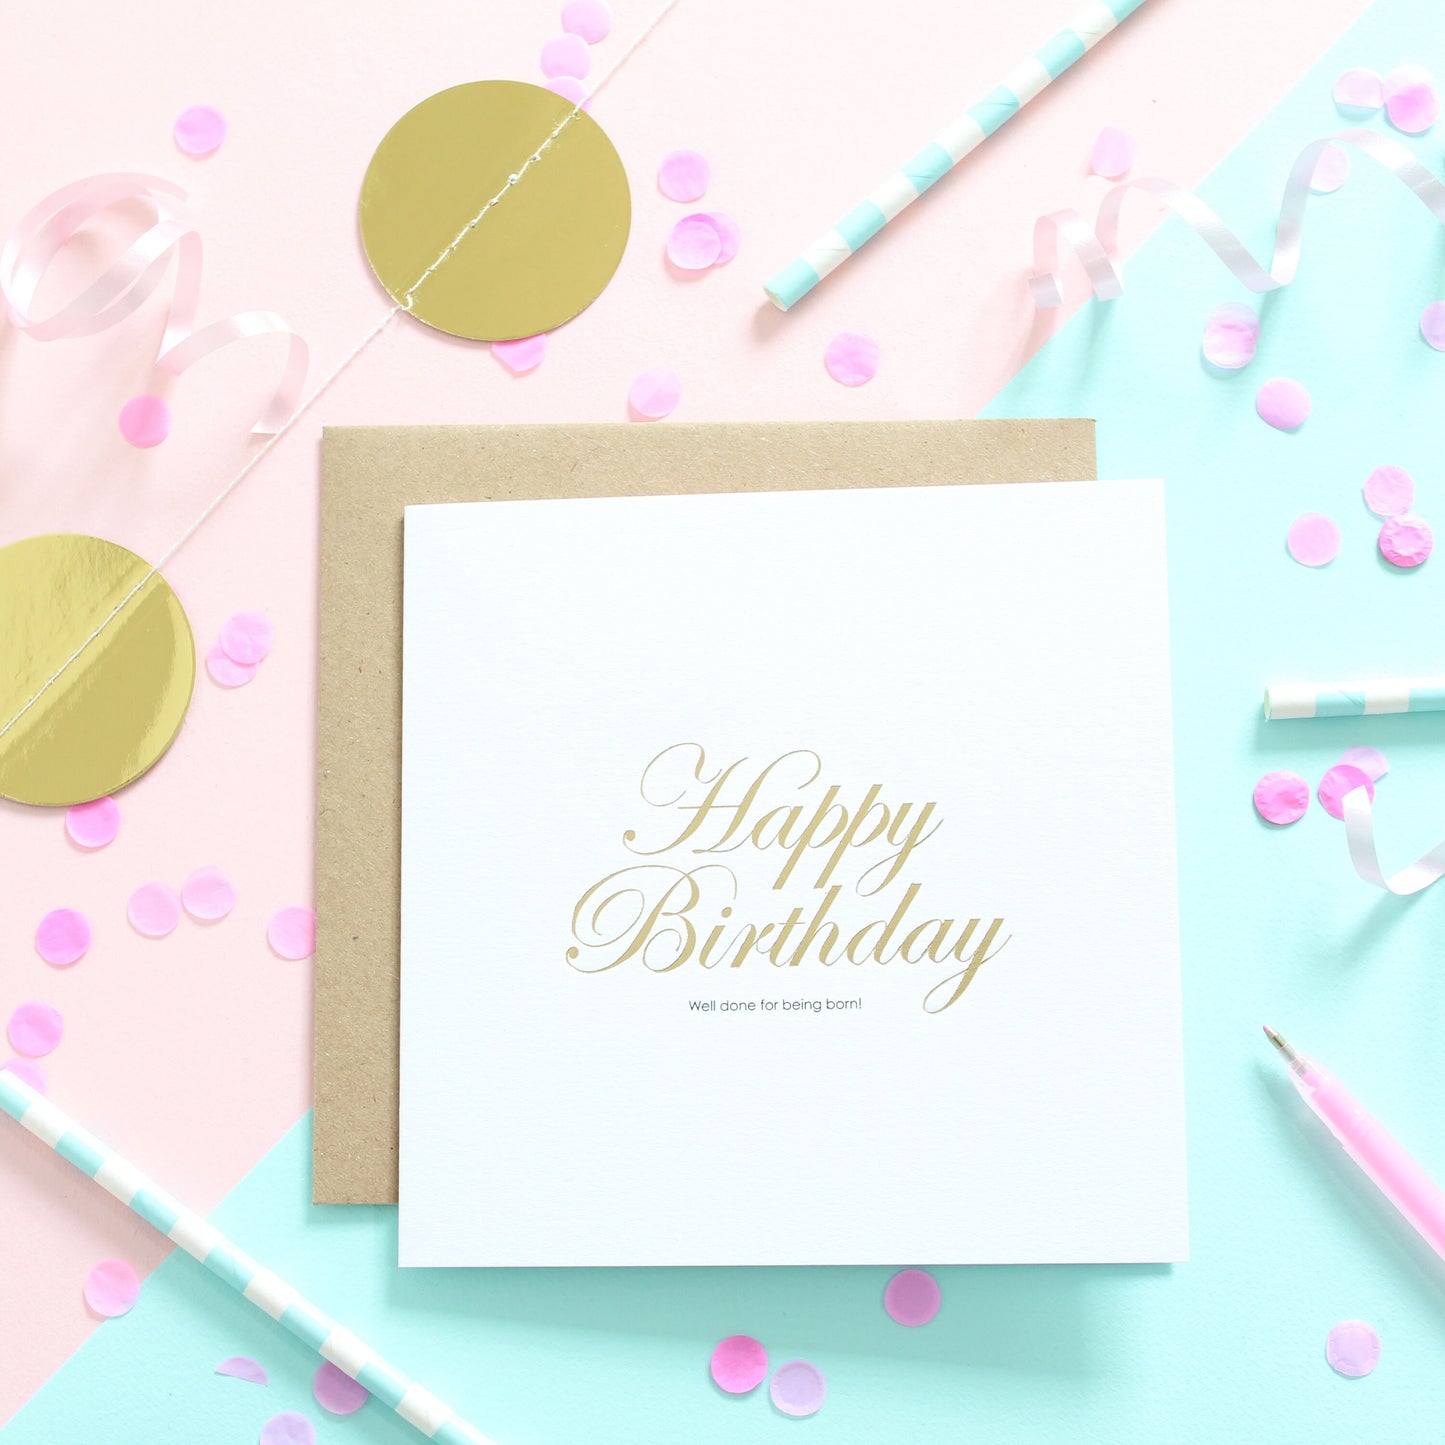 Well done for being born - Gold Foiled  Birthday Card